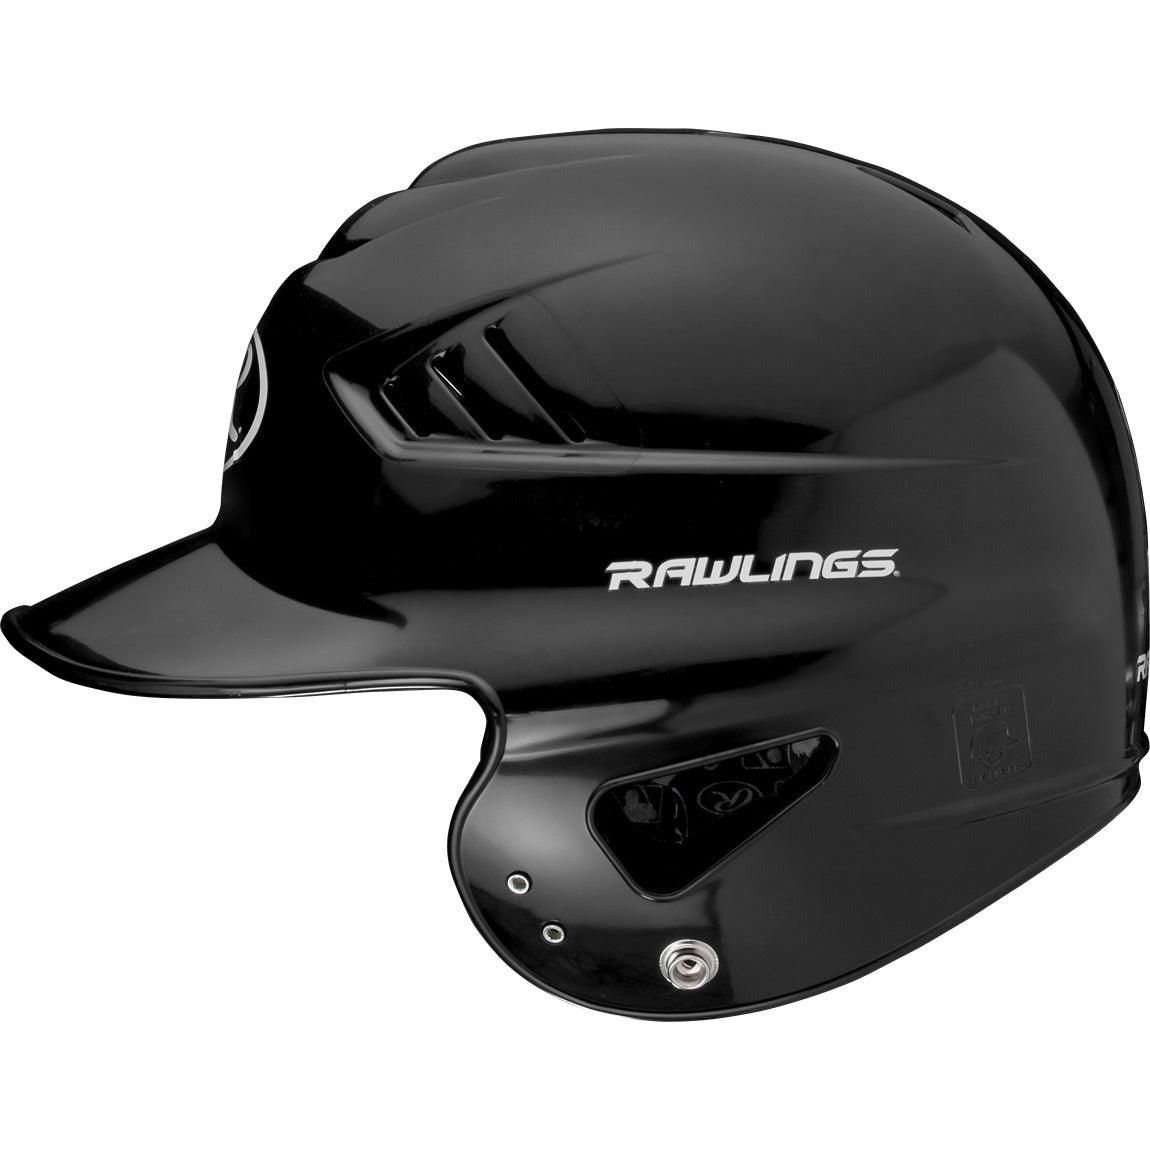 Coolflo Molded Helmet - Sports Excellence